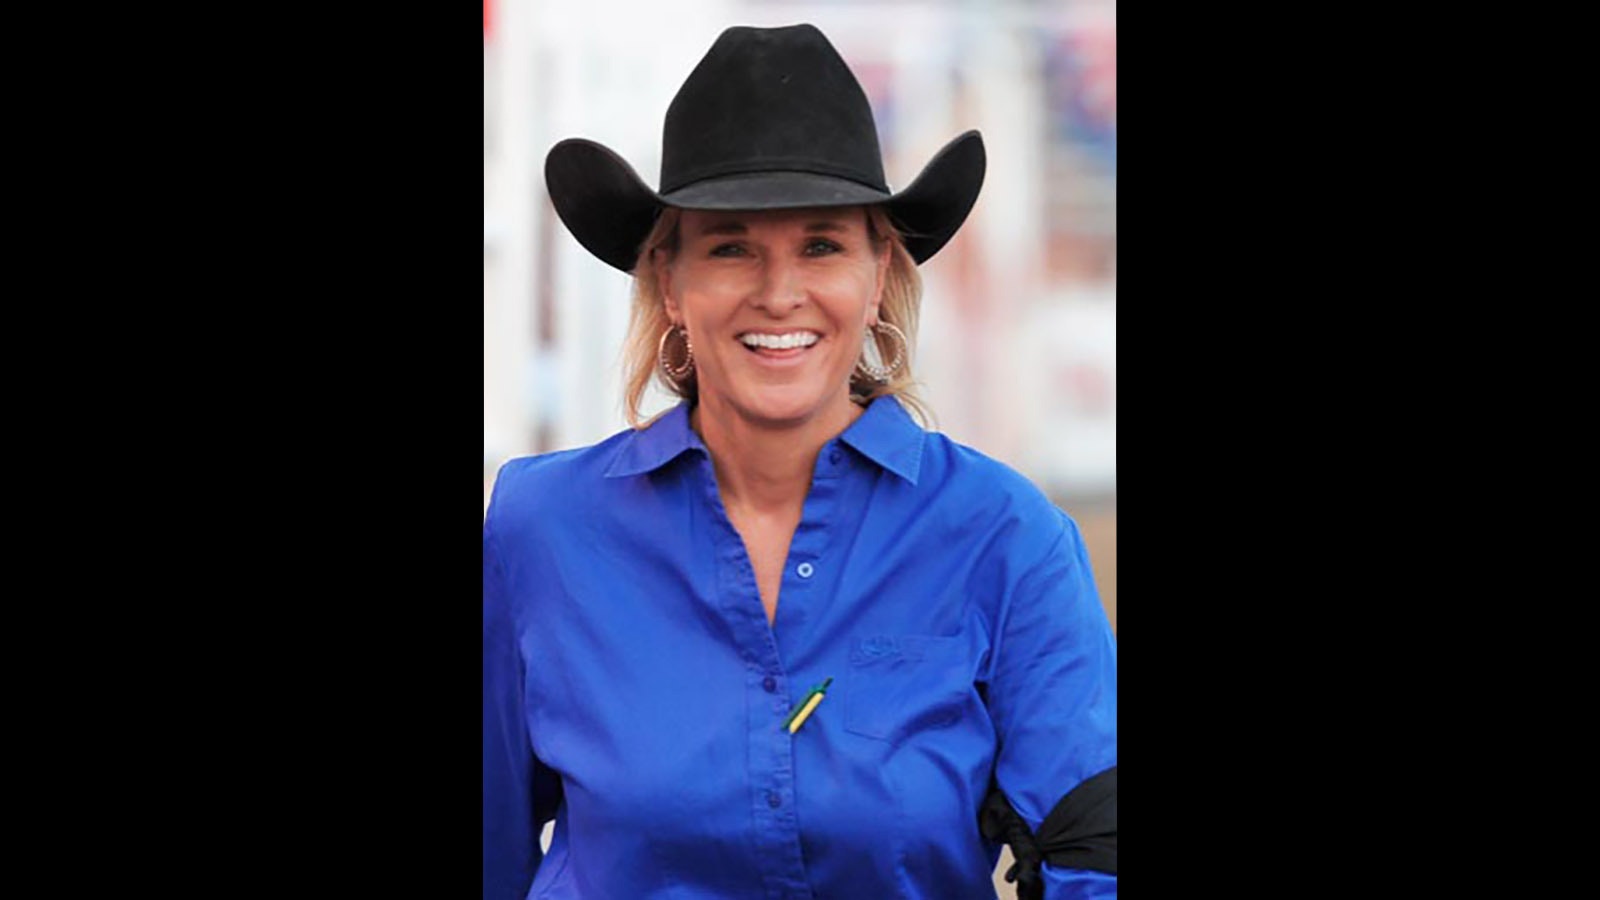 Kirsten Vold has been the stock contractor for the College National Finals Rodeo for 25 years, she said one of the biggest challenges is choosing the animal athletes so that the competition is fair.